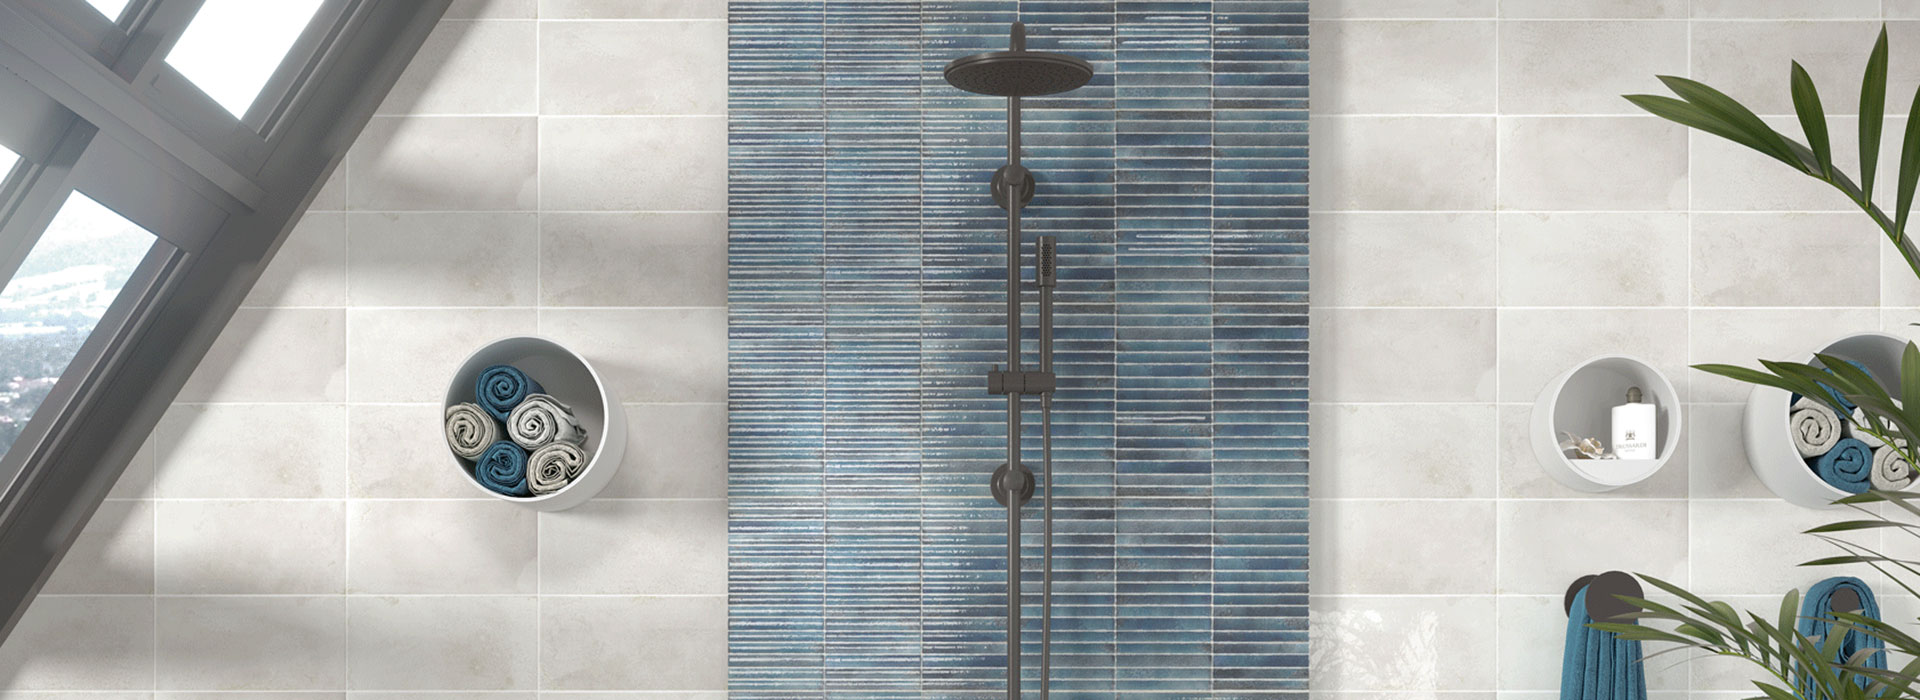 Introducing the eco-chic Wynn Tile Collection